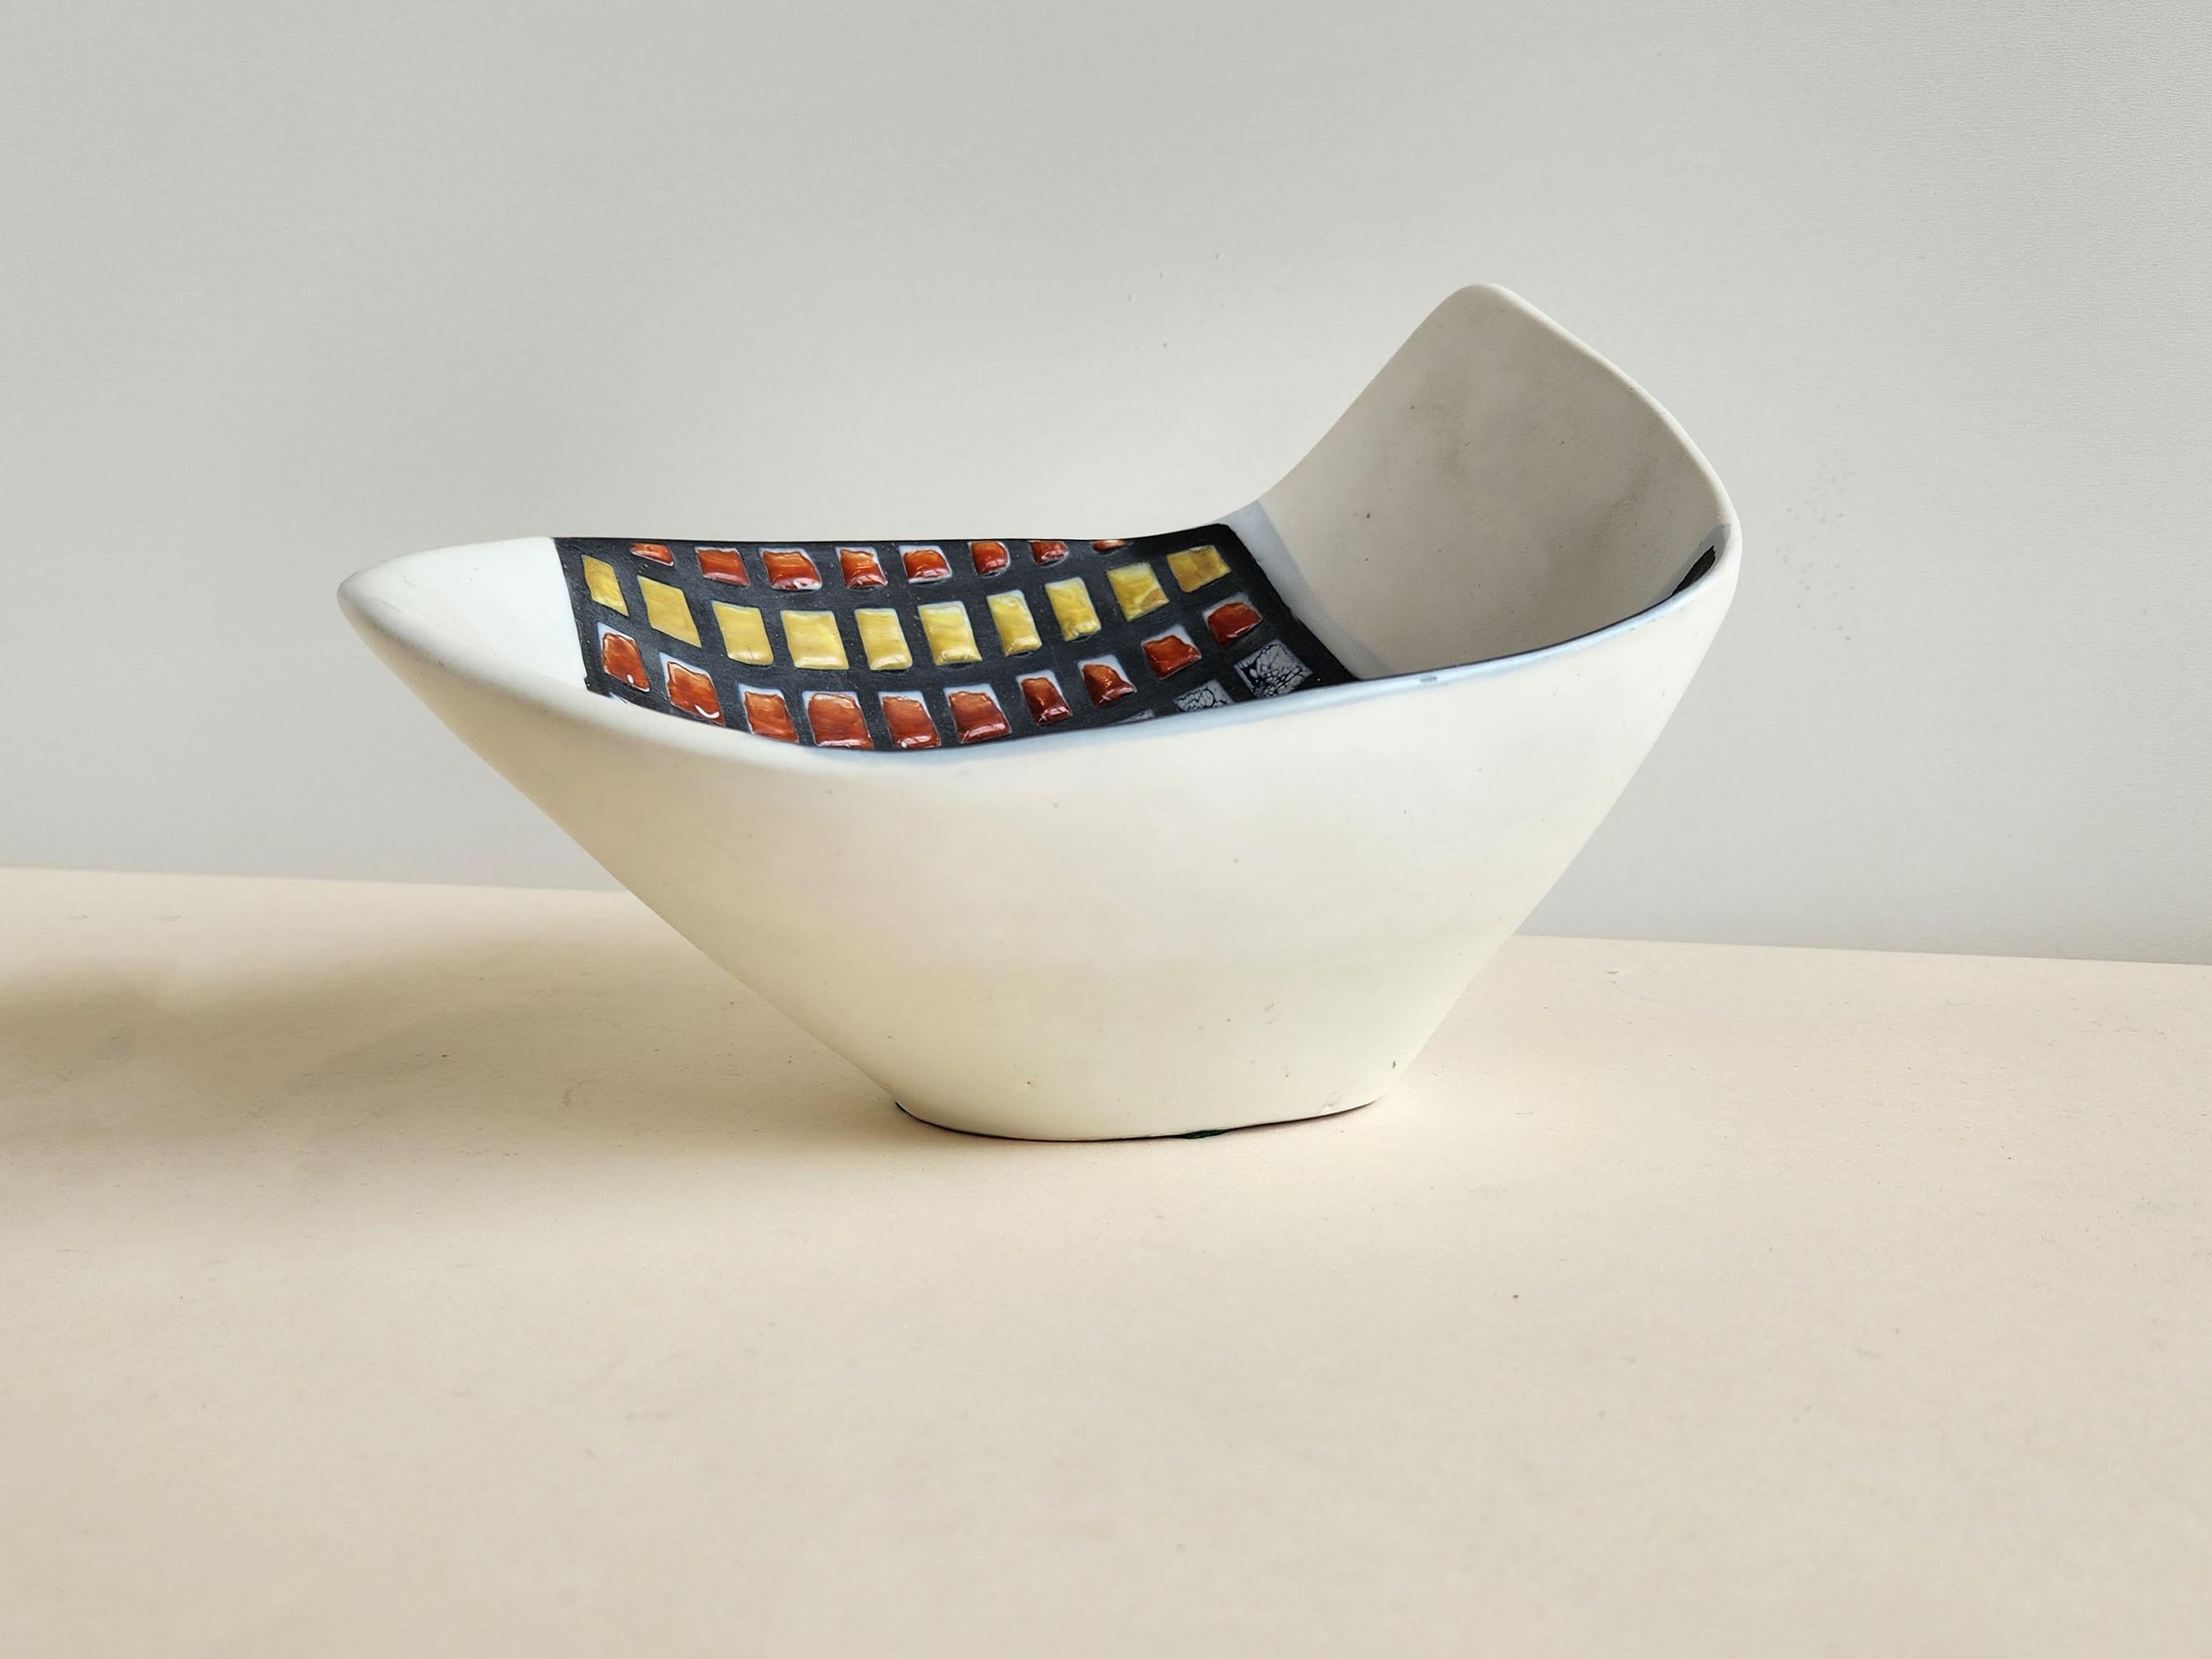 Deep Vintage Bowl with Cobblestones by Roger Capron - Vallauris, France

Roger Capron was in influential French ceramicist, known for his tiled tables and his use of recurring motifs such as stylized branches and geometrical suns.   He was born in